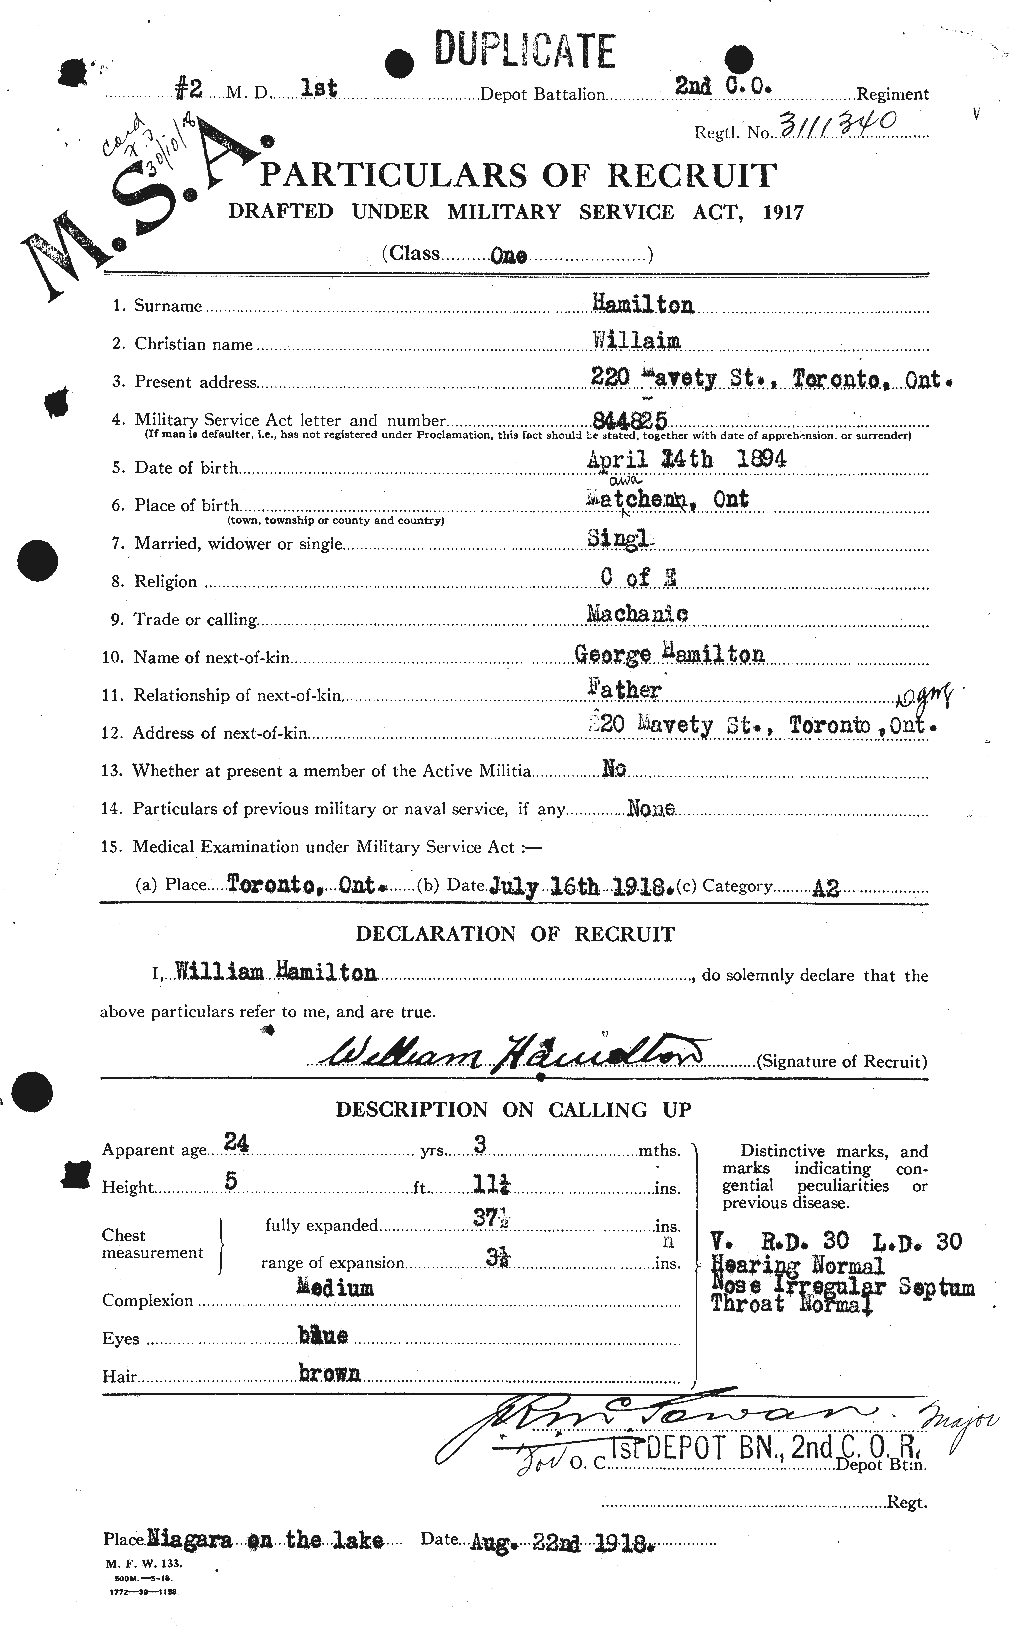 Personnel Records of the First World War - CEF 374854a